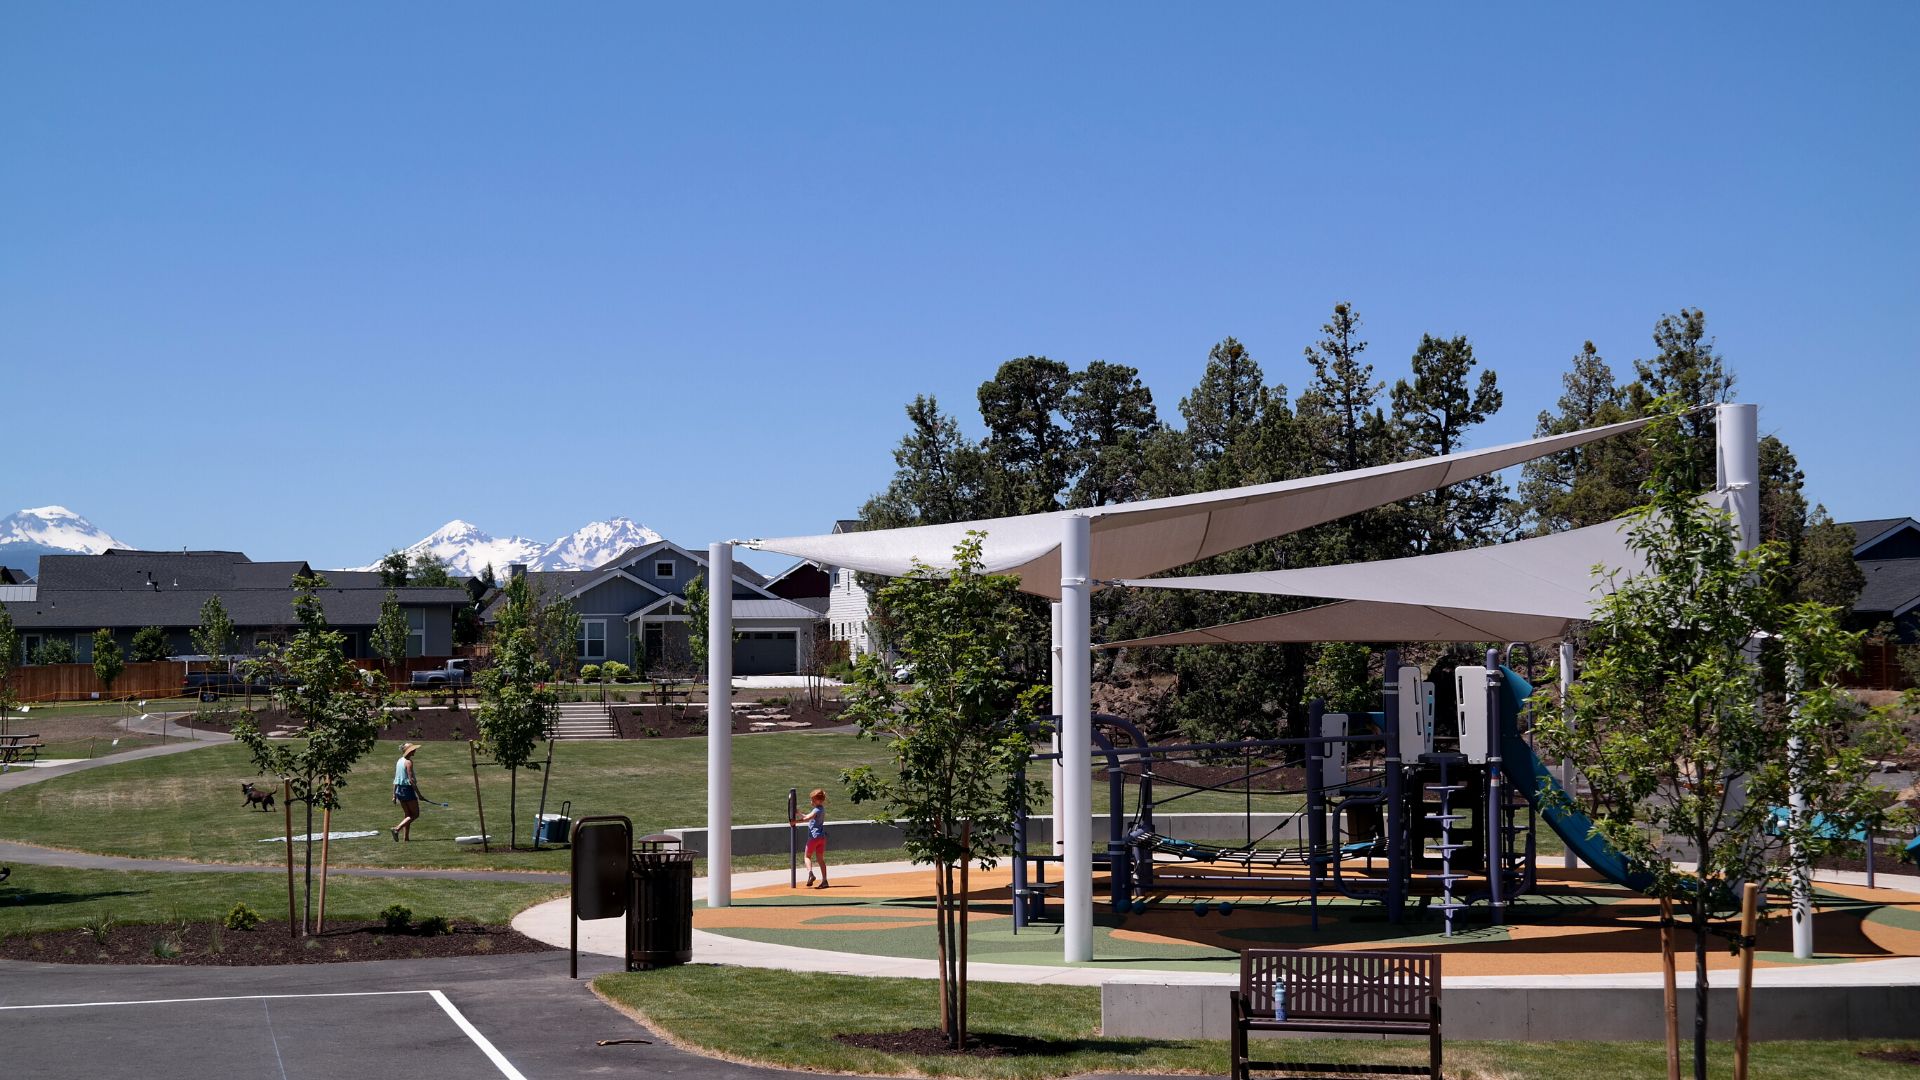 northpointe park playground and open space